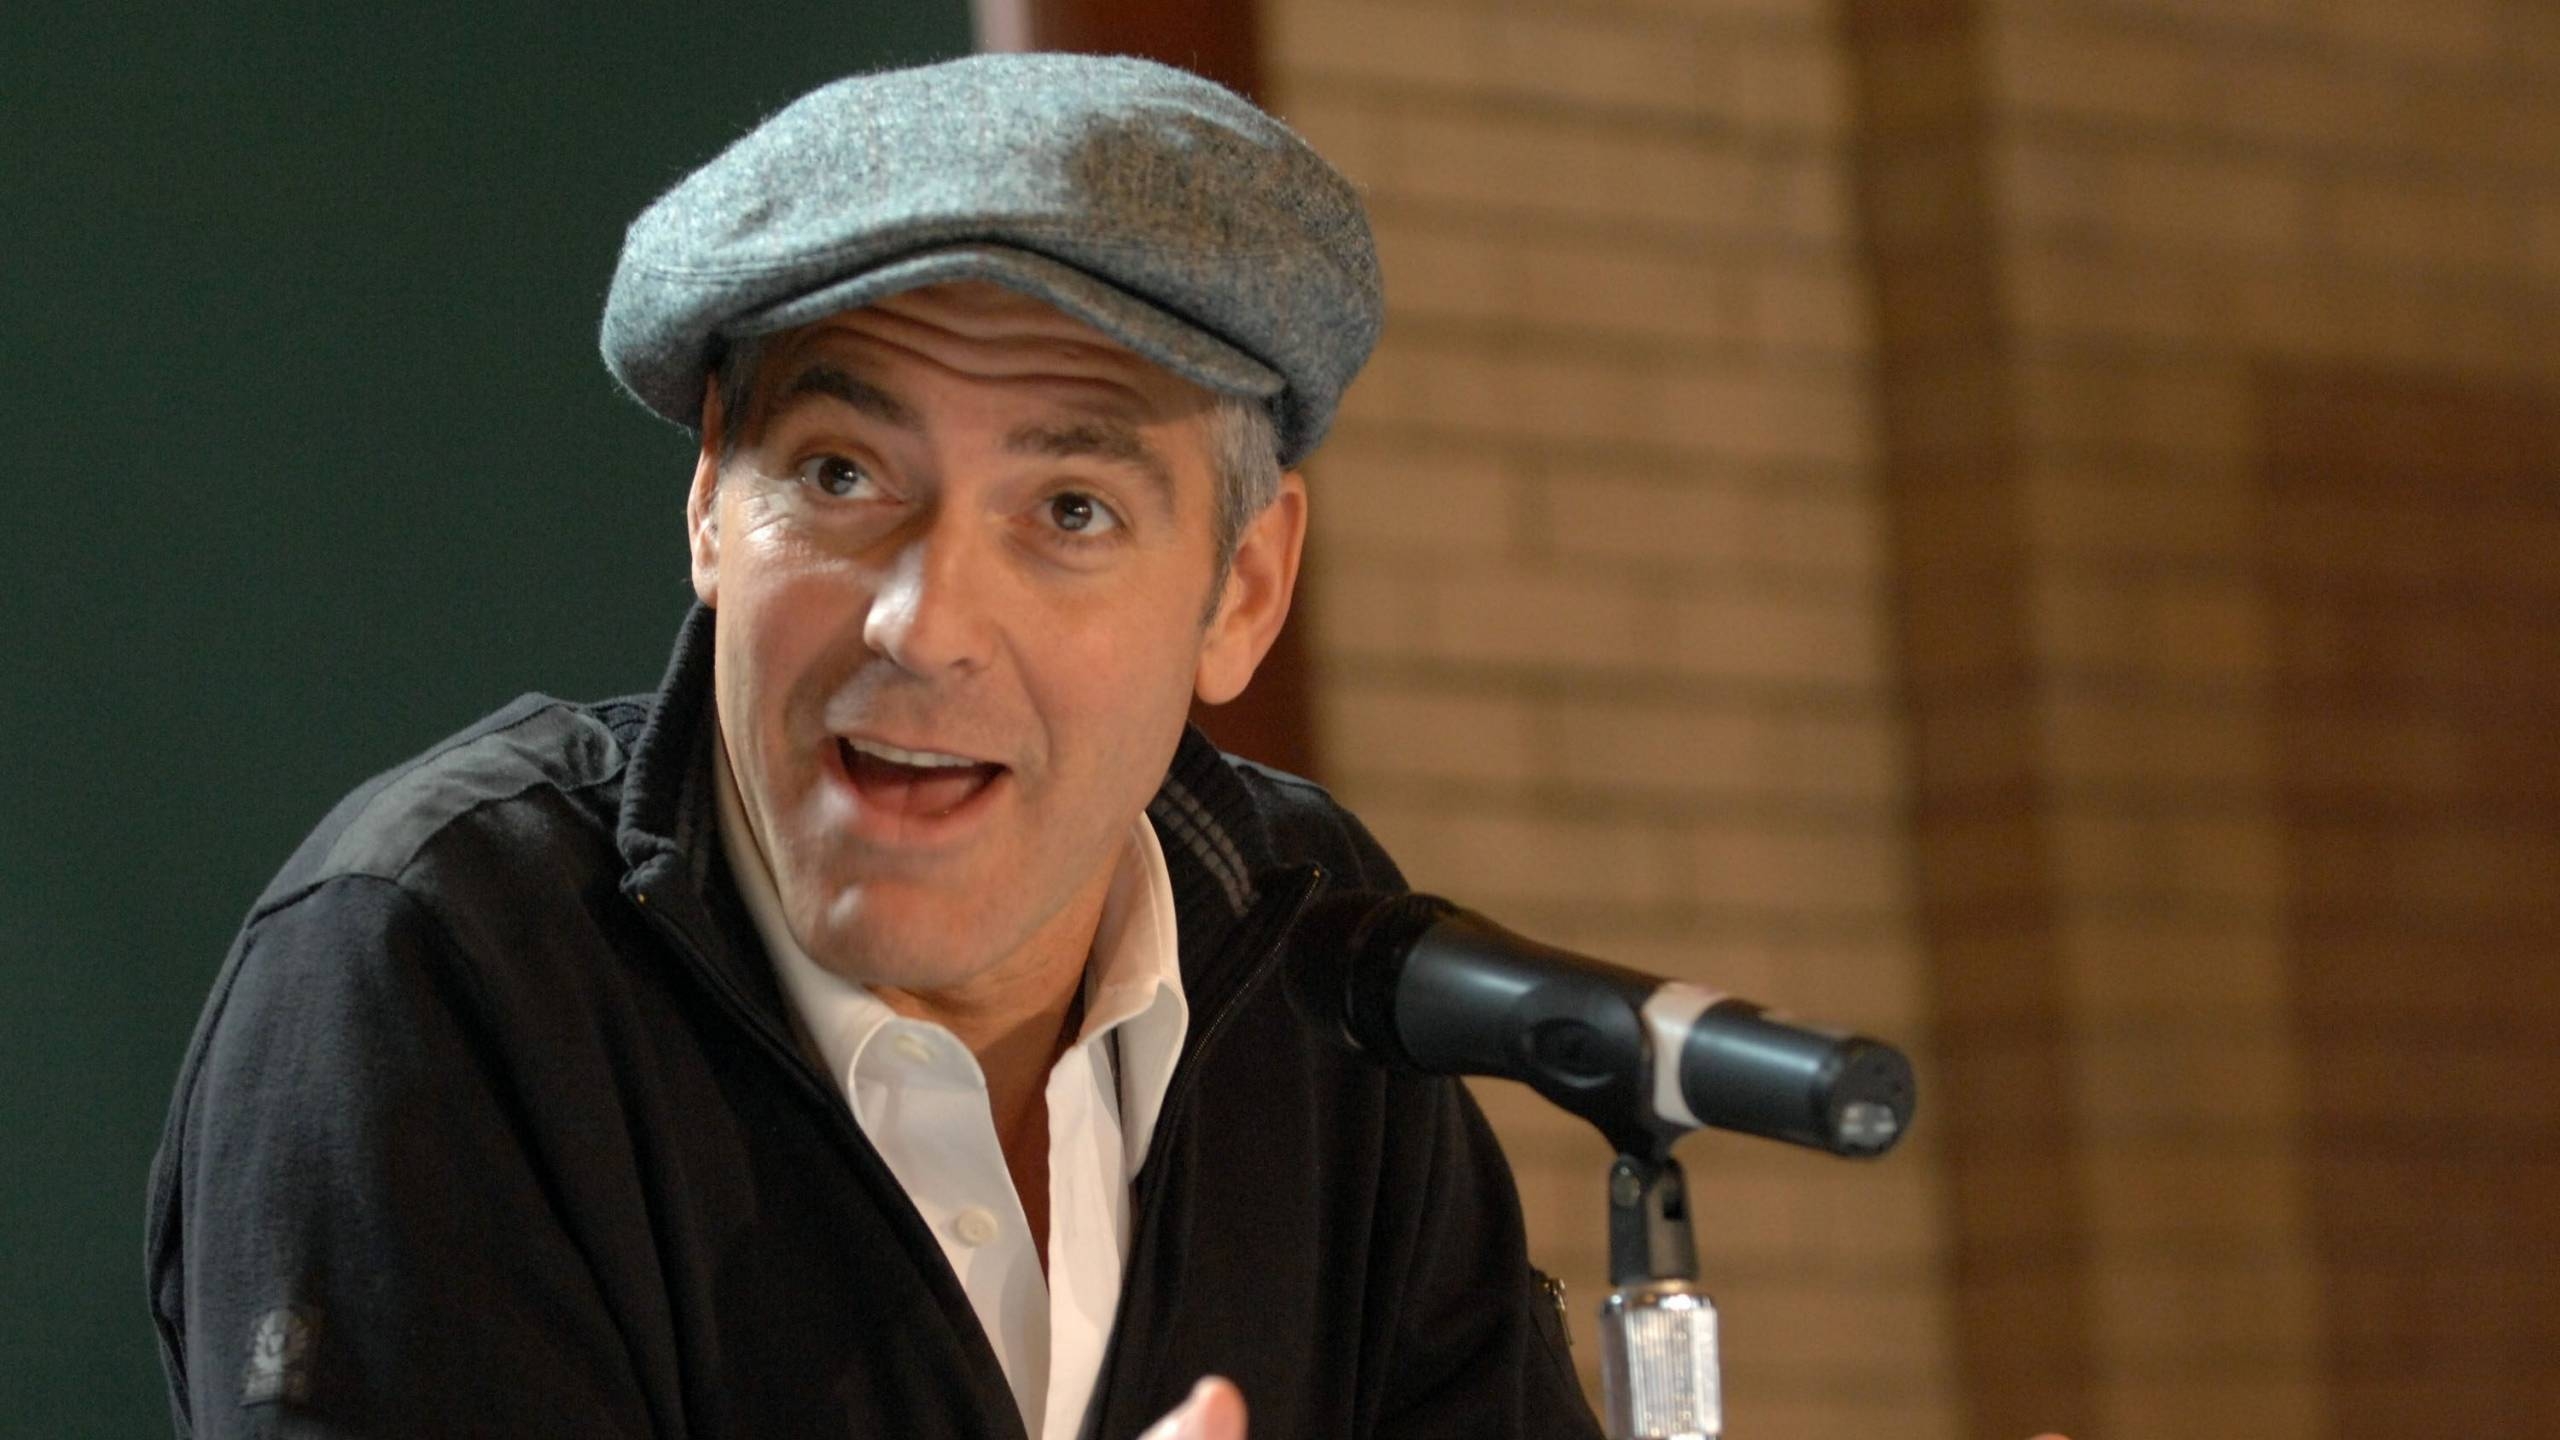 George Clooney Hat for 2560x1440 HDTV resolution